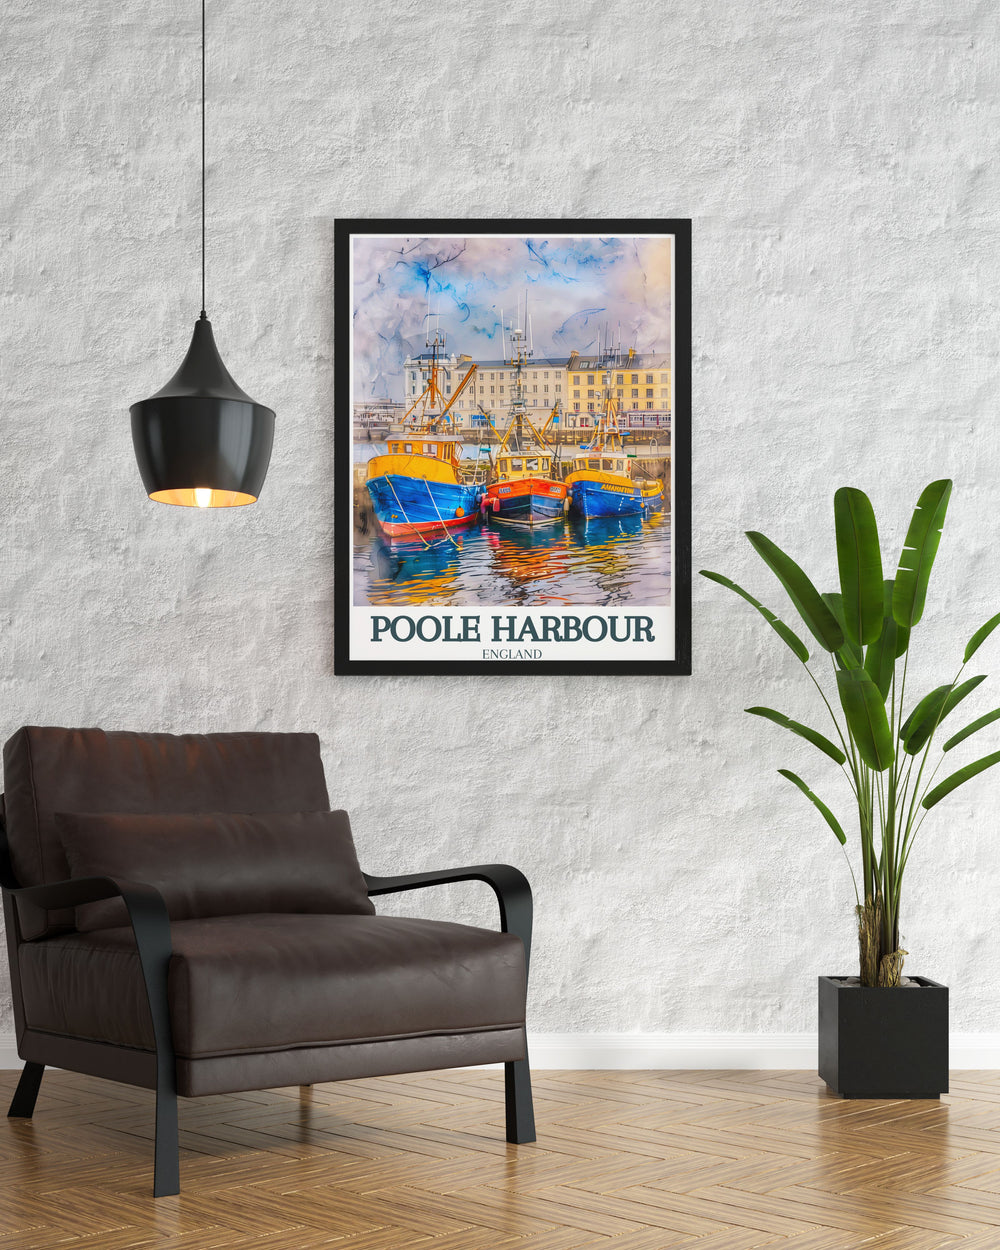 Beautiful England art print of Poole Harbour and Borough of Poole Holes Bay capturing the tranquil beauty of this iconic location a perfect addition to any wall decor or as a thoughtful travel gift for loved ones